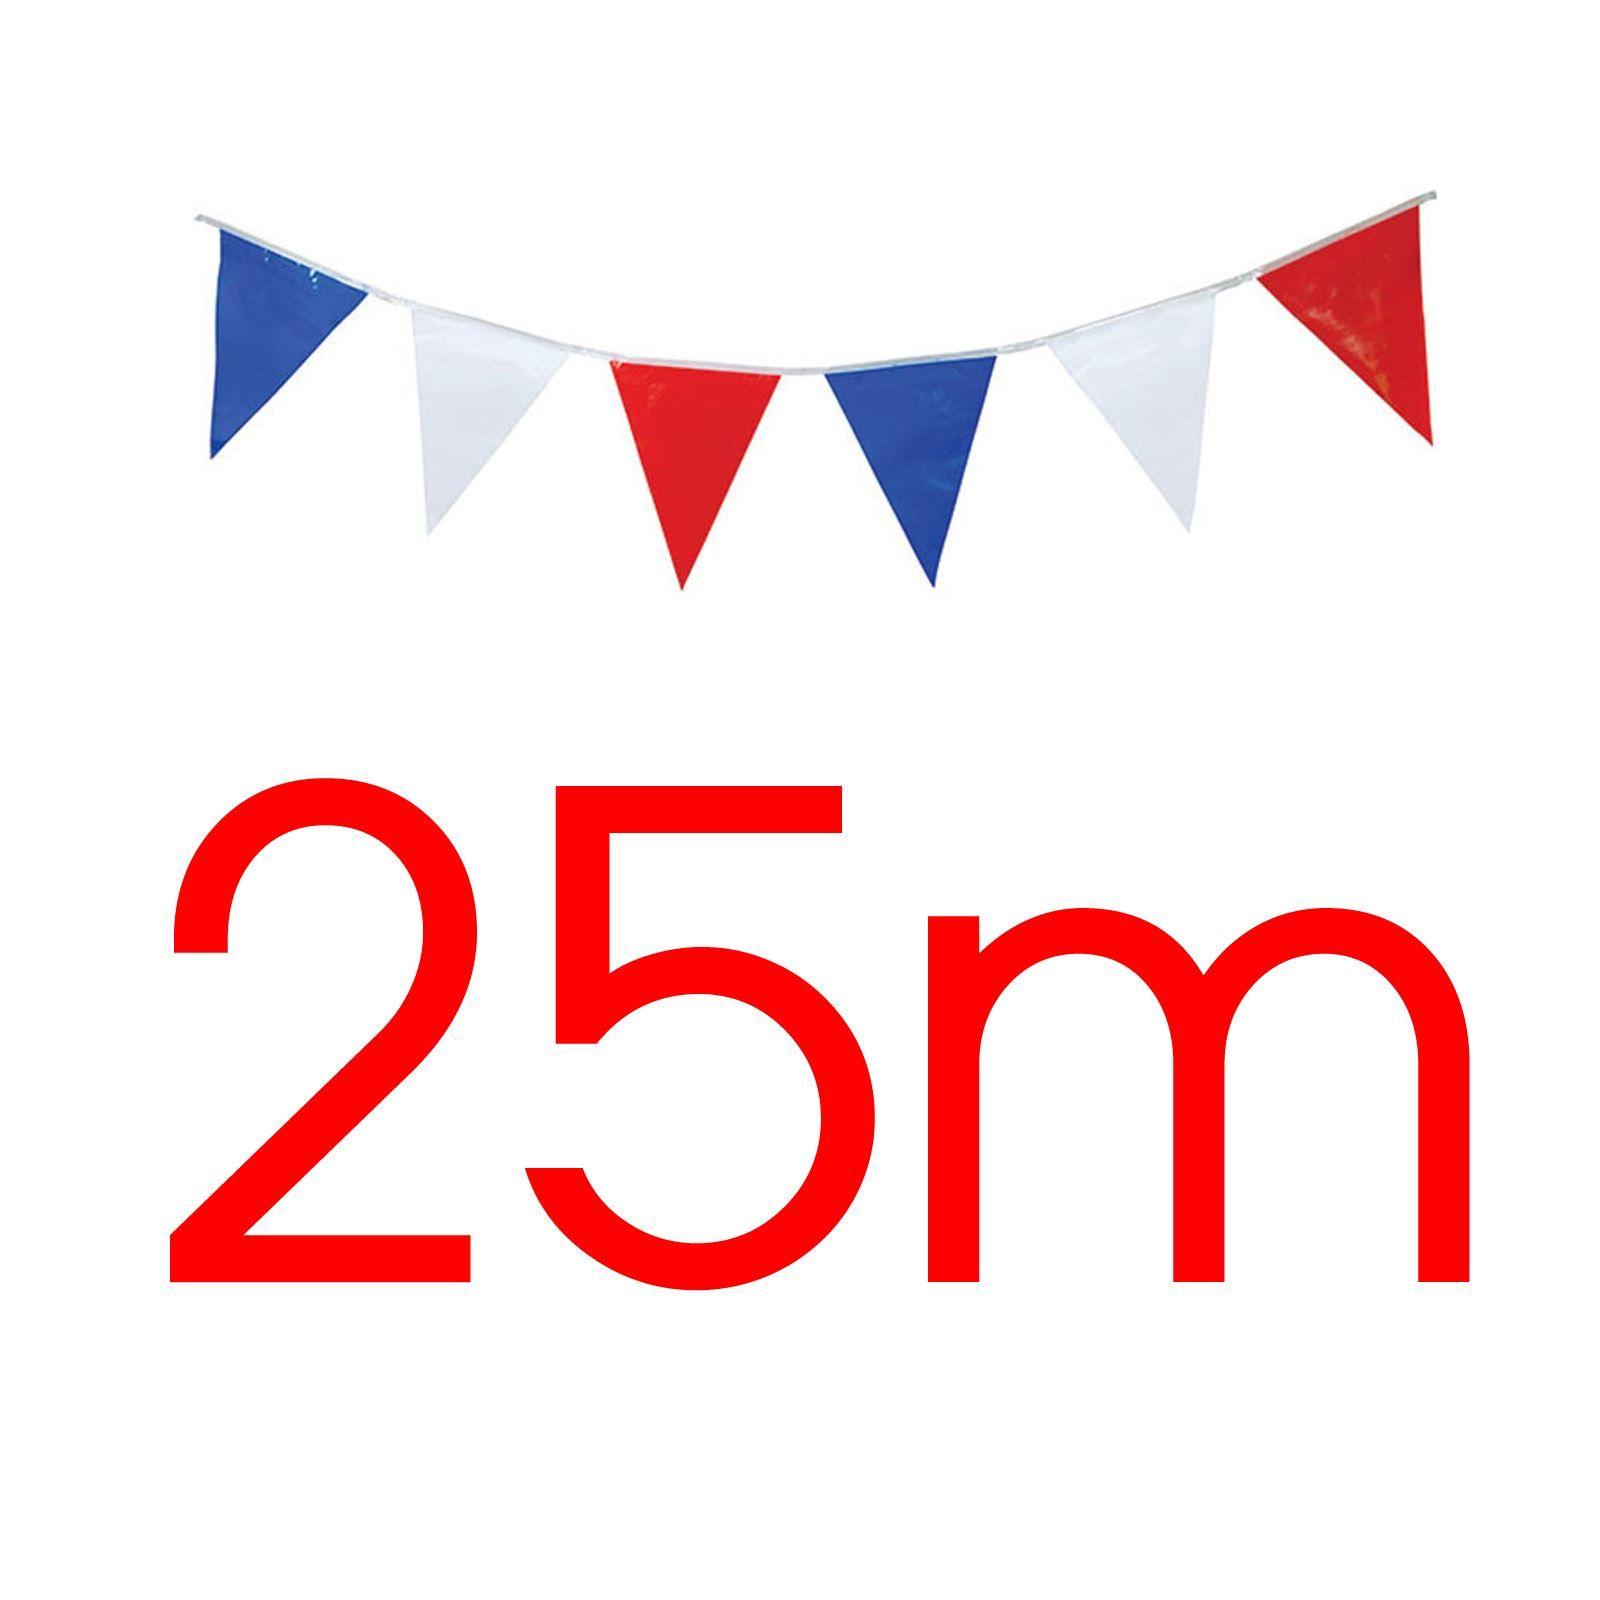 Red White Blue Triangle Logo - 82ft Flag Pennant Red White and Blue PVC Party Bunting Triangle